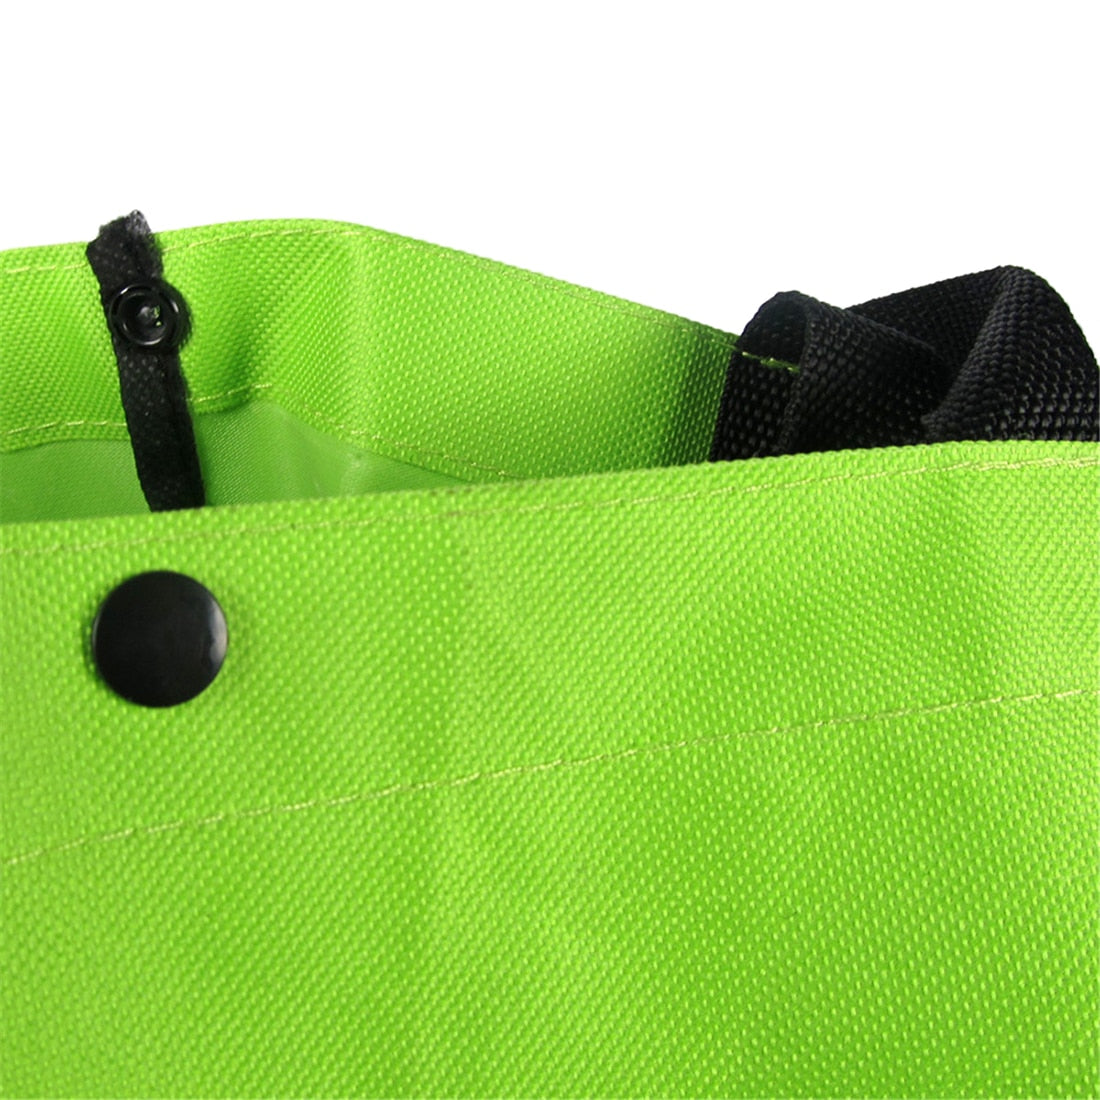 Portable Shopping Trolley Bag With Wheels Foldable Cart Rolling Grocery Green - ebowsos